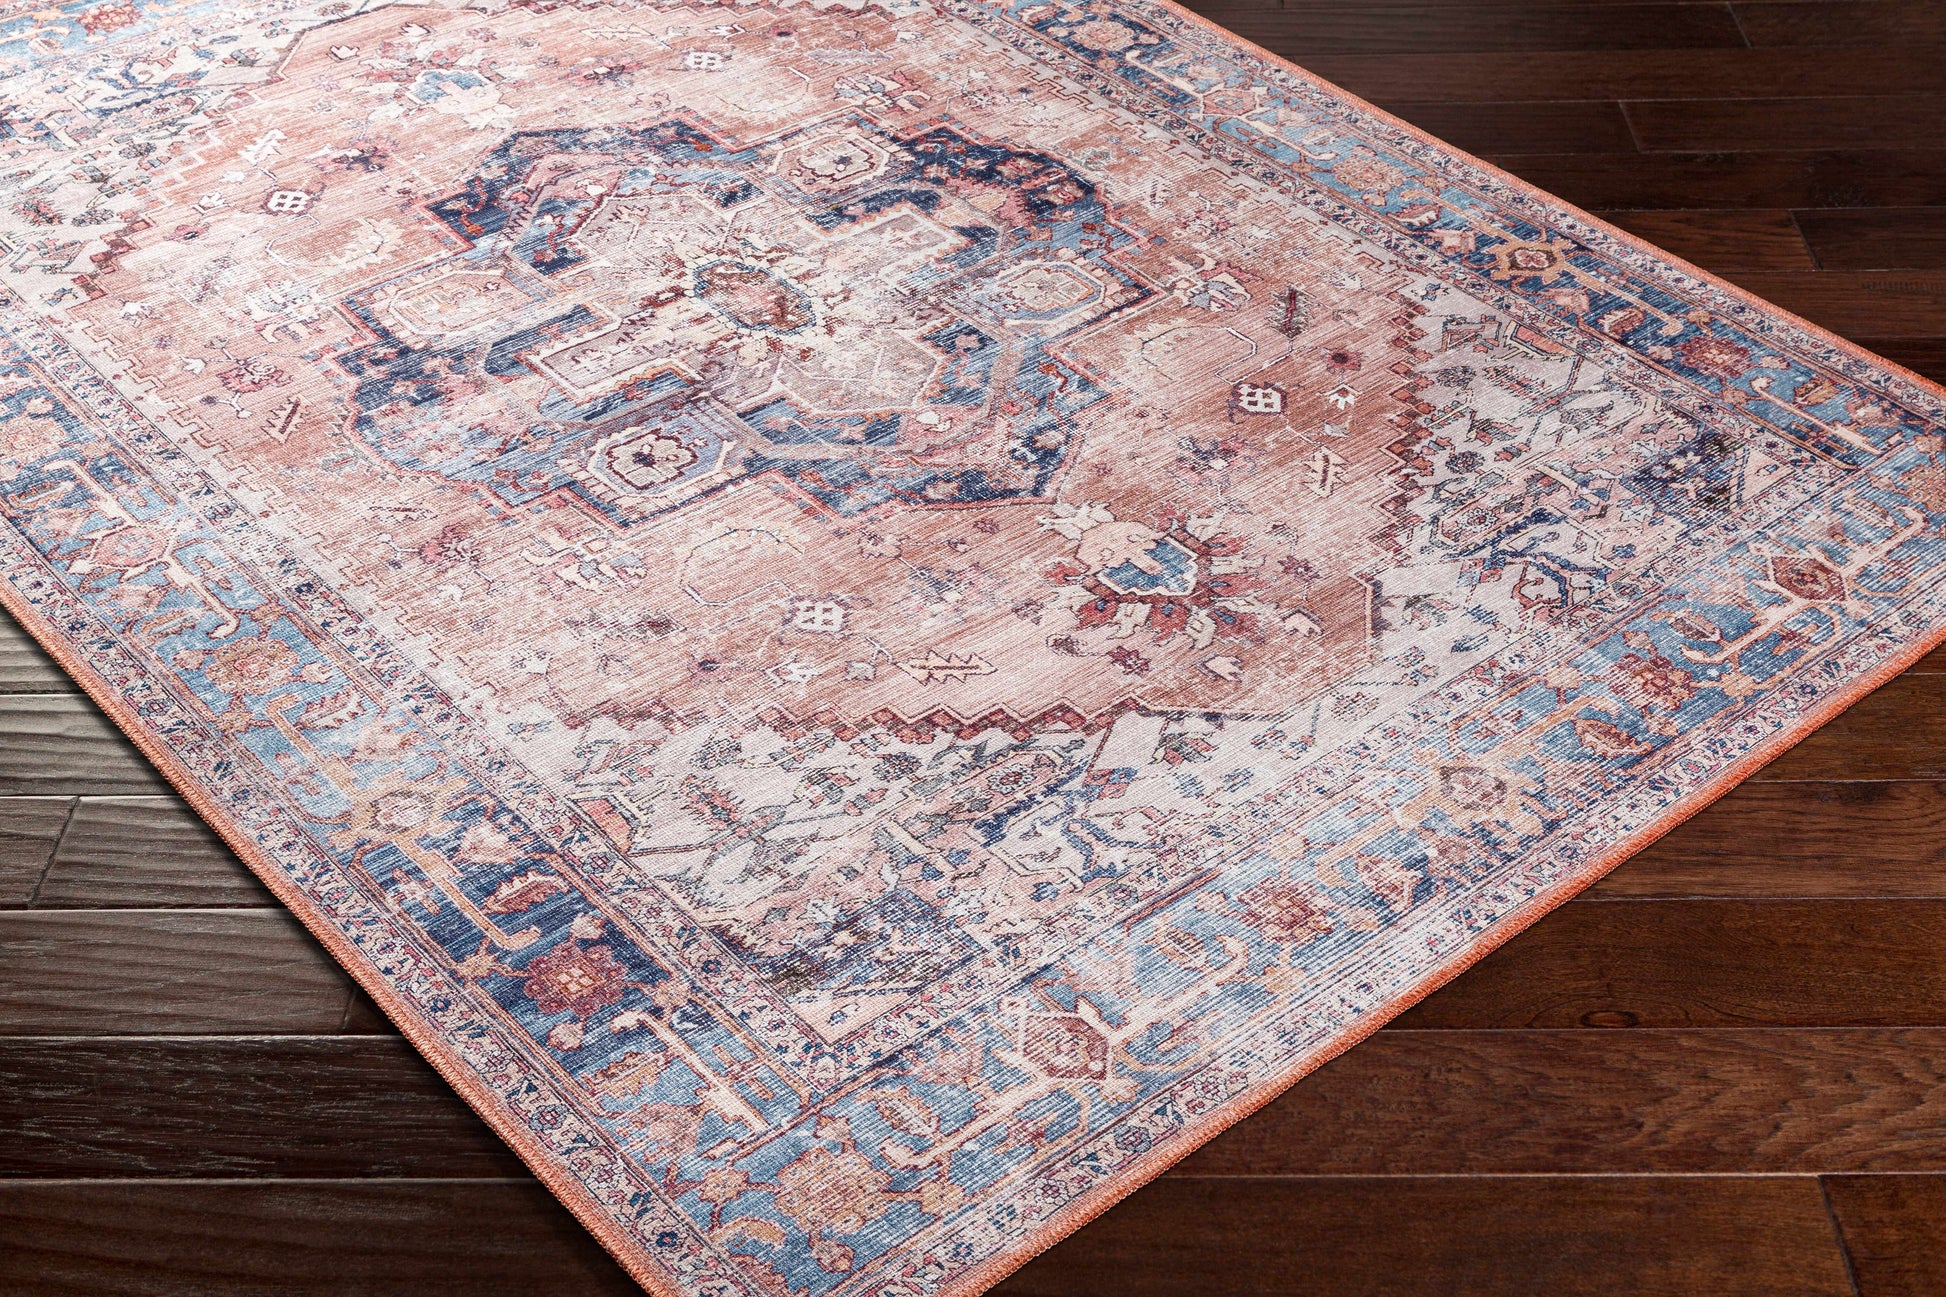 Boutique Rugs Rugs Kera Rust Washable Area Rug